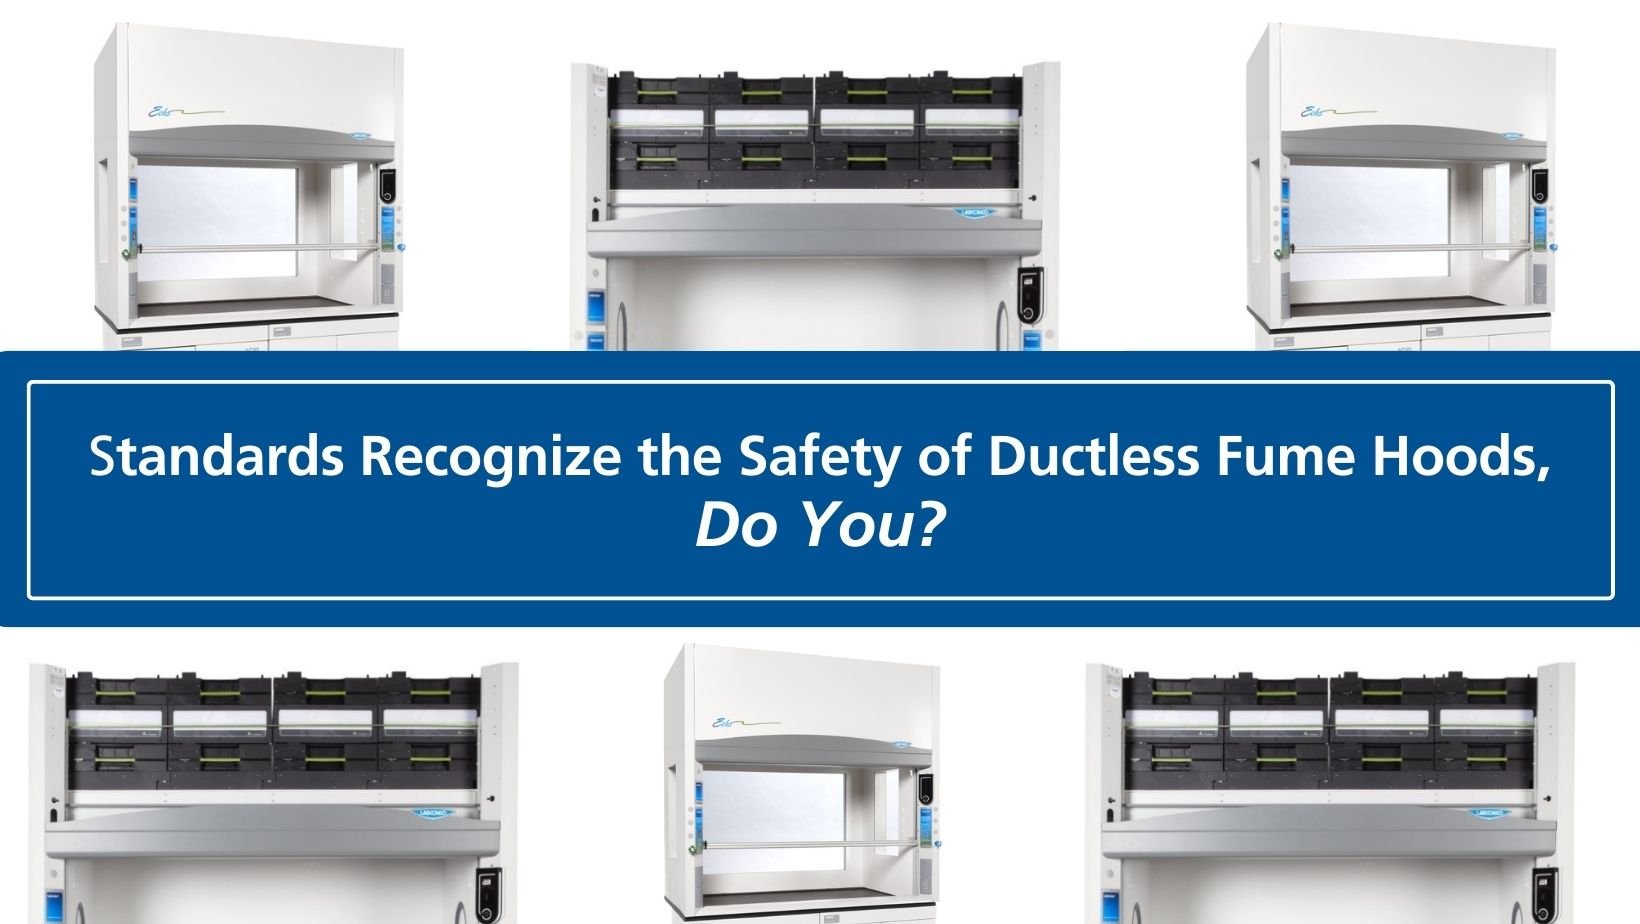 Ductless Fume Hoods Cover